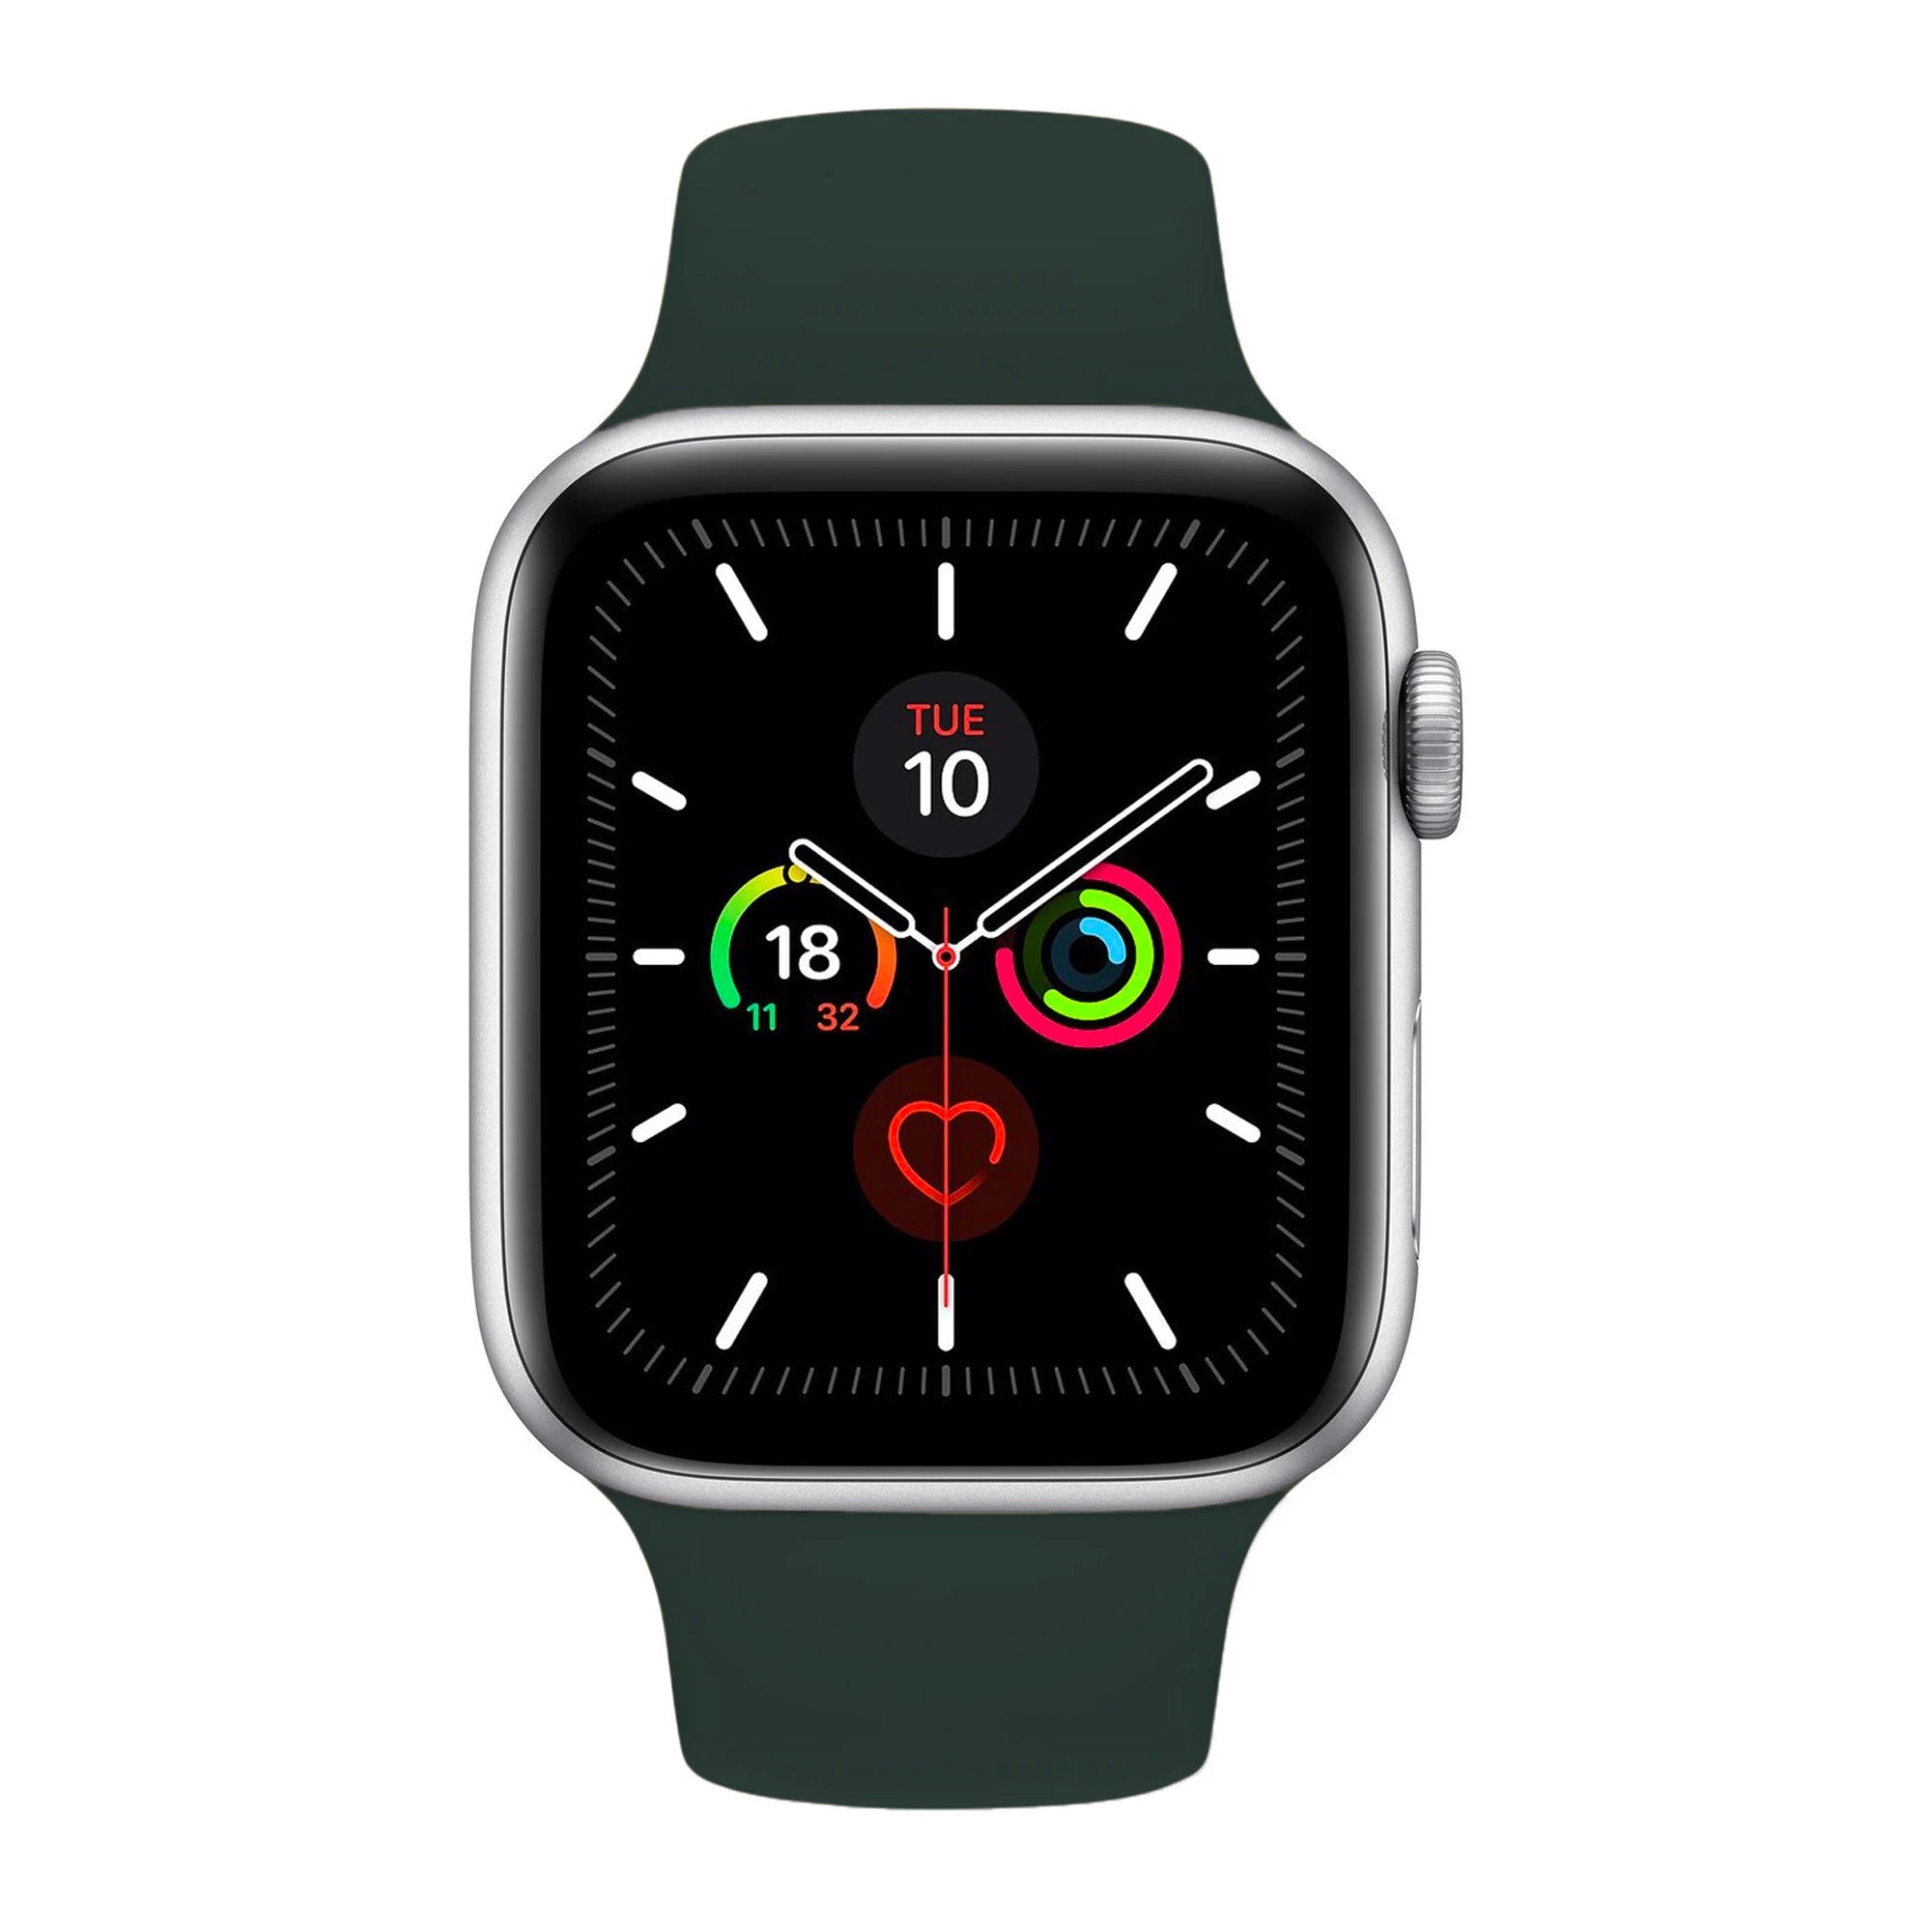 Dark Olive Silicone Band for Apple Watch Silicone Bands   Accessories Gifts UK